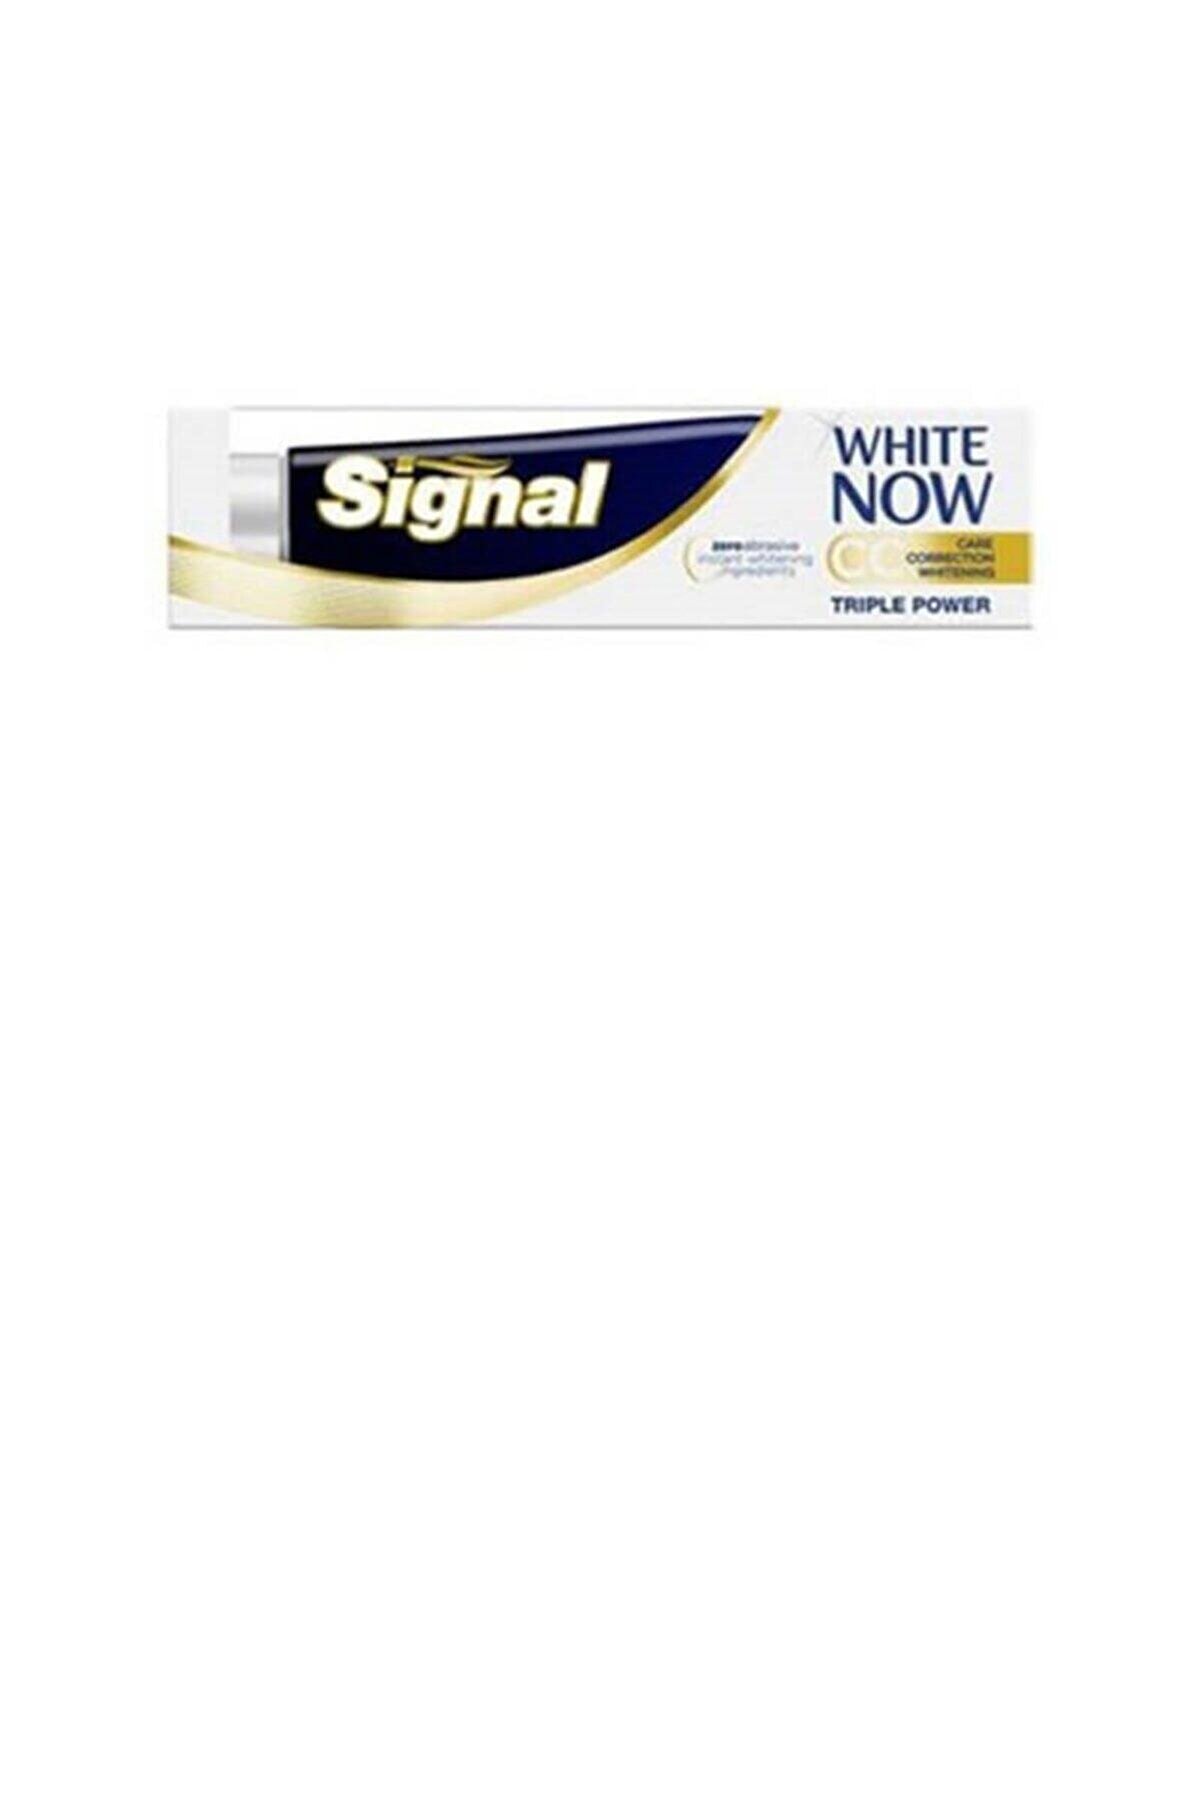 Signal White Now Carbon Correct Gold 97 gr